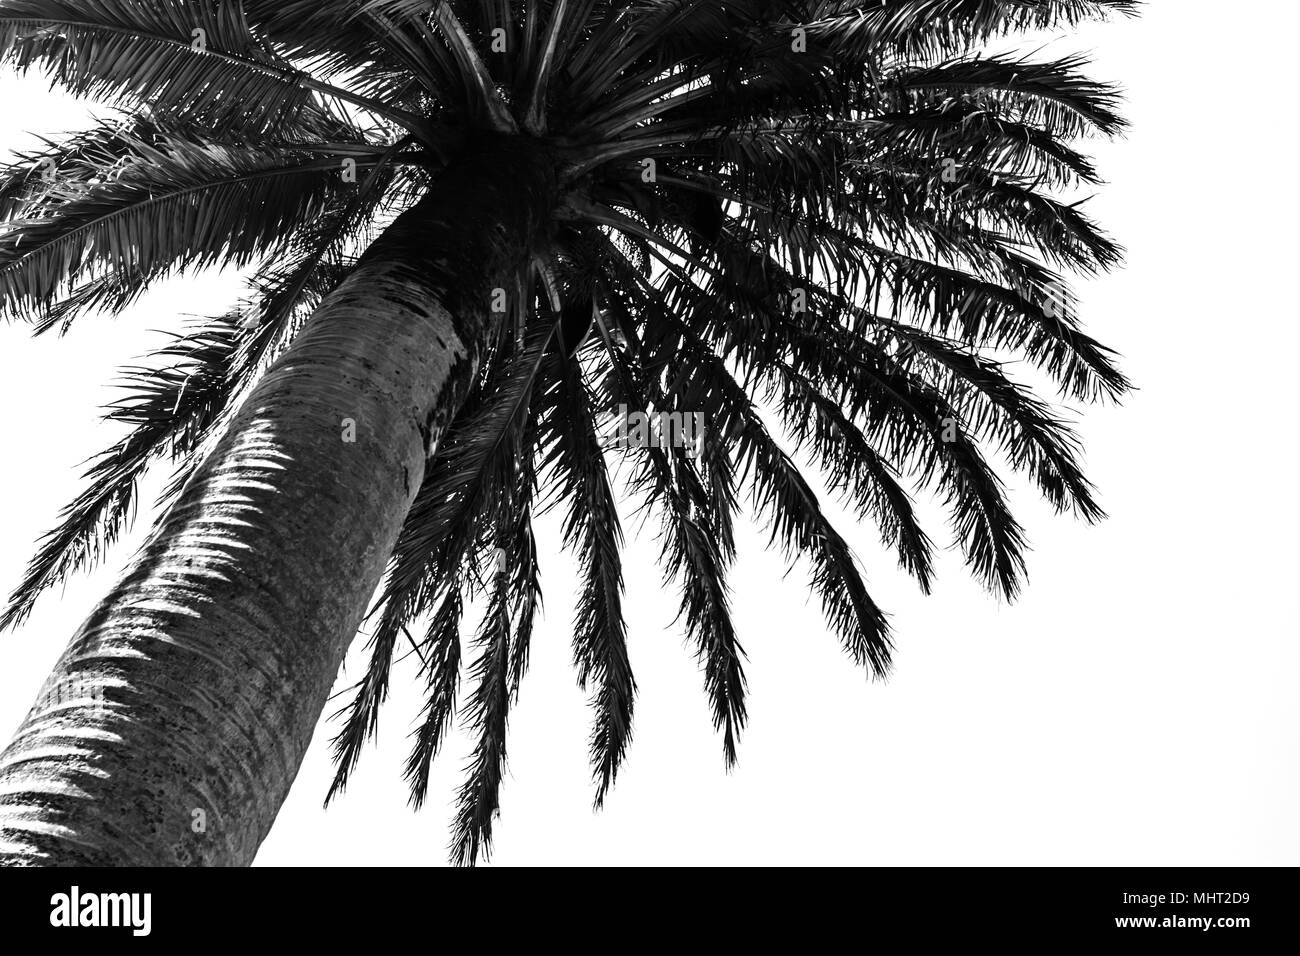 Black palm tree against white background Banque D'Images